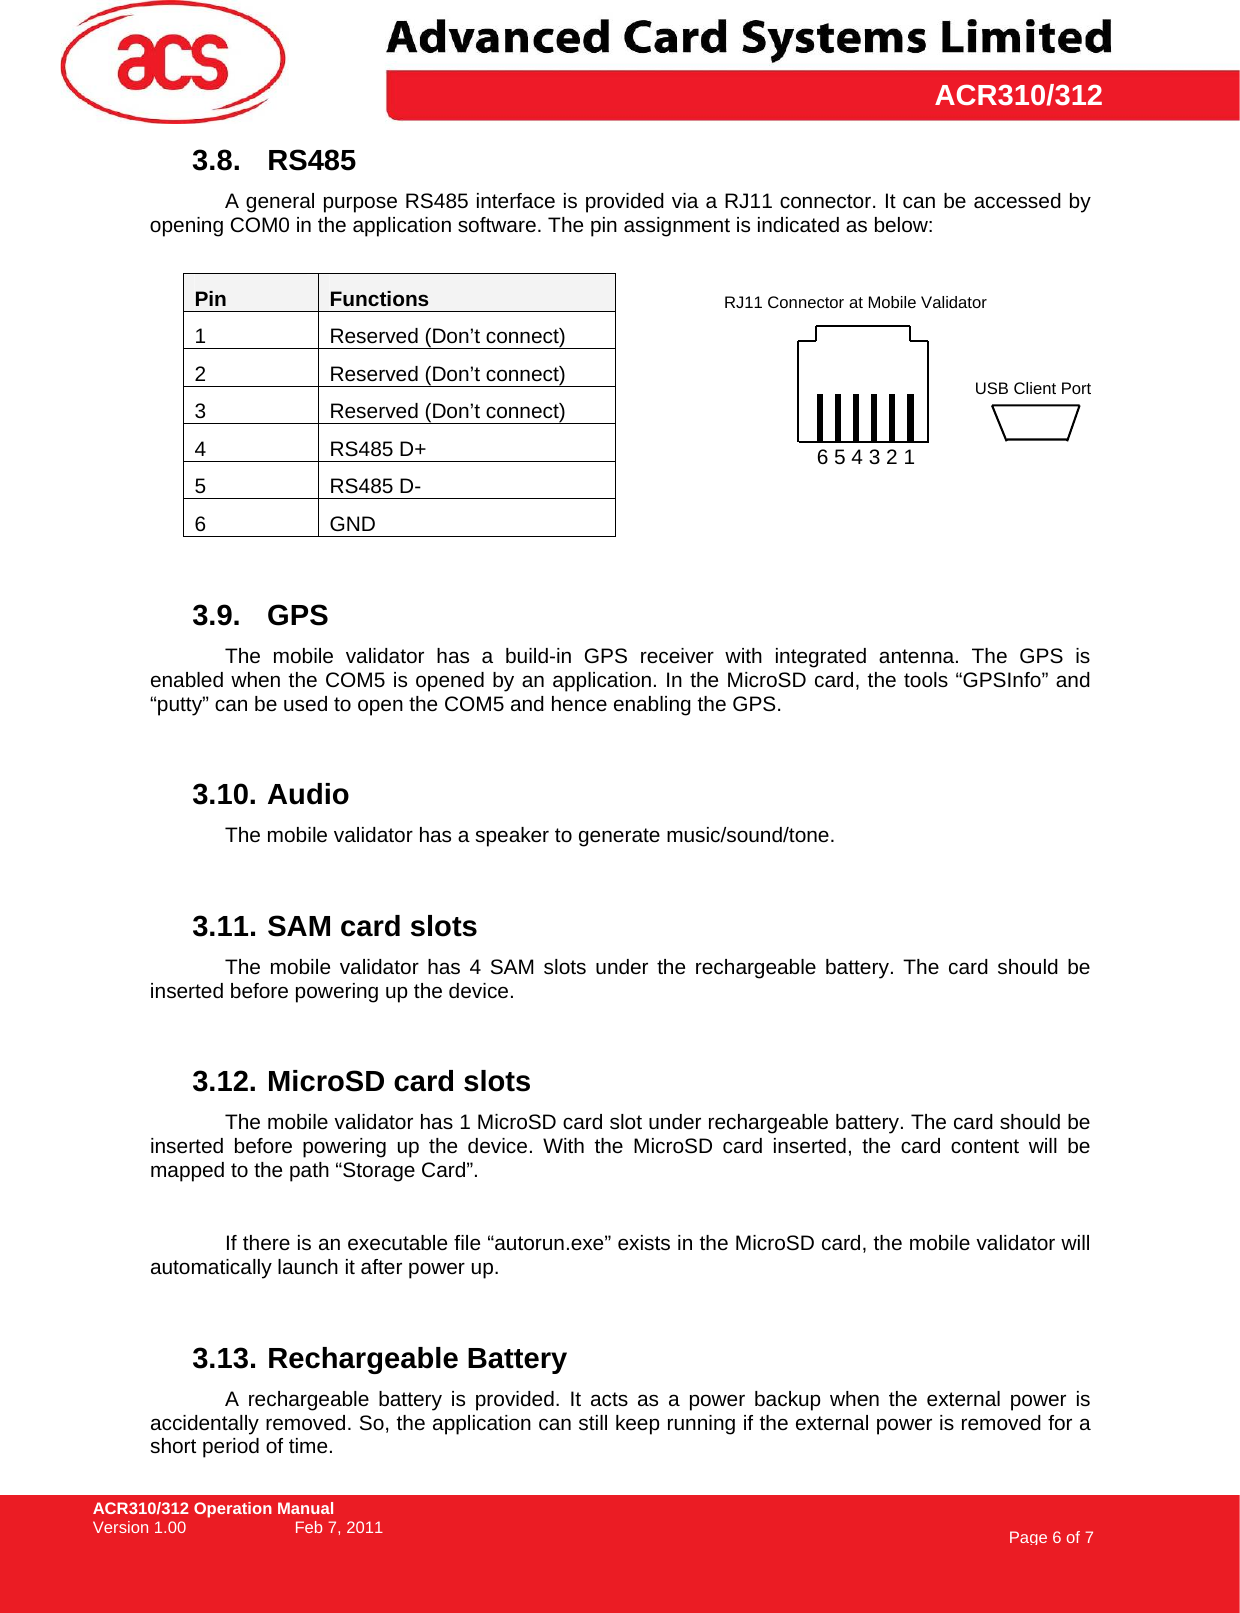 ACR310/312 Operation Manual Version 1.00    Feb 7, 2011  Page 6 of 7     ACR310/3123.8. RS485 A general purpose RS485 interface is provided via a RJ11 connector. It can be accessed by opening COM0 in the application software. The pin assignment is indicated as below:  Pin  Functions 1  Reserved (Don’t connect) 2  Reserved (Don’t connect) 3  Reserved (Don’t connect) 4 RS485 D+ 5 RS485 D- 6 GND  3.9. GPS The mobile validator has a build-in GPS receiver with integrated antenna. The GPS is enabled when the COM5 is opened by an application. In the MicroSD card, the tools “GPSInfo” and “putty” can be used to open the COM5 and hence enabling the GPS.  3.10. Audio The mobile validator has a speaker to generate music/sound/tone.  3.11. SAM card slots The mobile validator has 4 SAM slots under the rechargeable battery. The card should be inserted before powering up the device.  3.12. MicroSD card slots The mobile validator has 1 MicroSD card slot under rechargeable battery. The card should be inserted before powering up the device. With the MicroSD card inserted, the card content will be mapped to the path “Storage Card”.    If there is an executable file “autorun.exe” exists in the MicroSD card, the mobile validator will automatically launch it after power up.  3.13. Rechargeable Battery A rechargeable battery is provided. It acts as a power backup when the external power is accidentally removed. So, the application can still keep running if the external power is removed for a short period of time. RJ11 Connector at Mobile Validator 6 5 4 3 2 1 USB Client Port